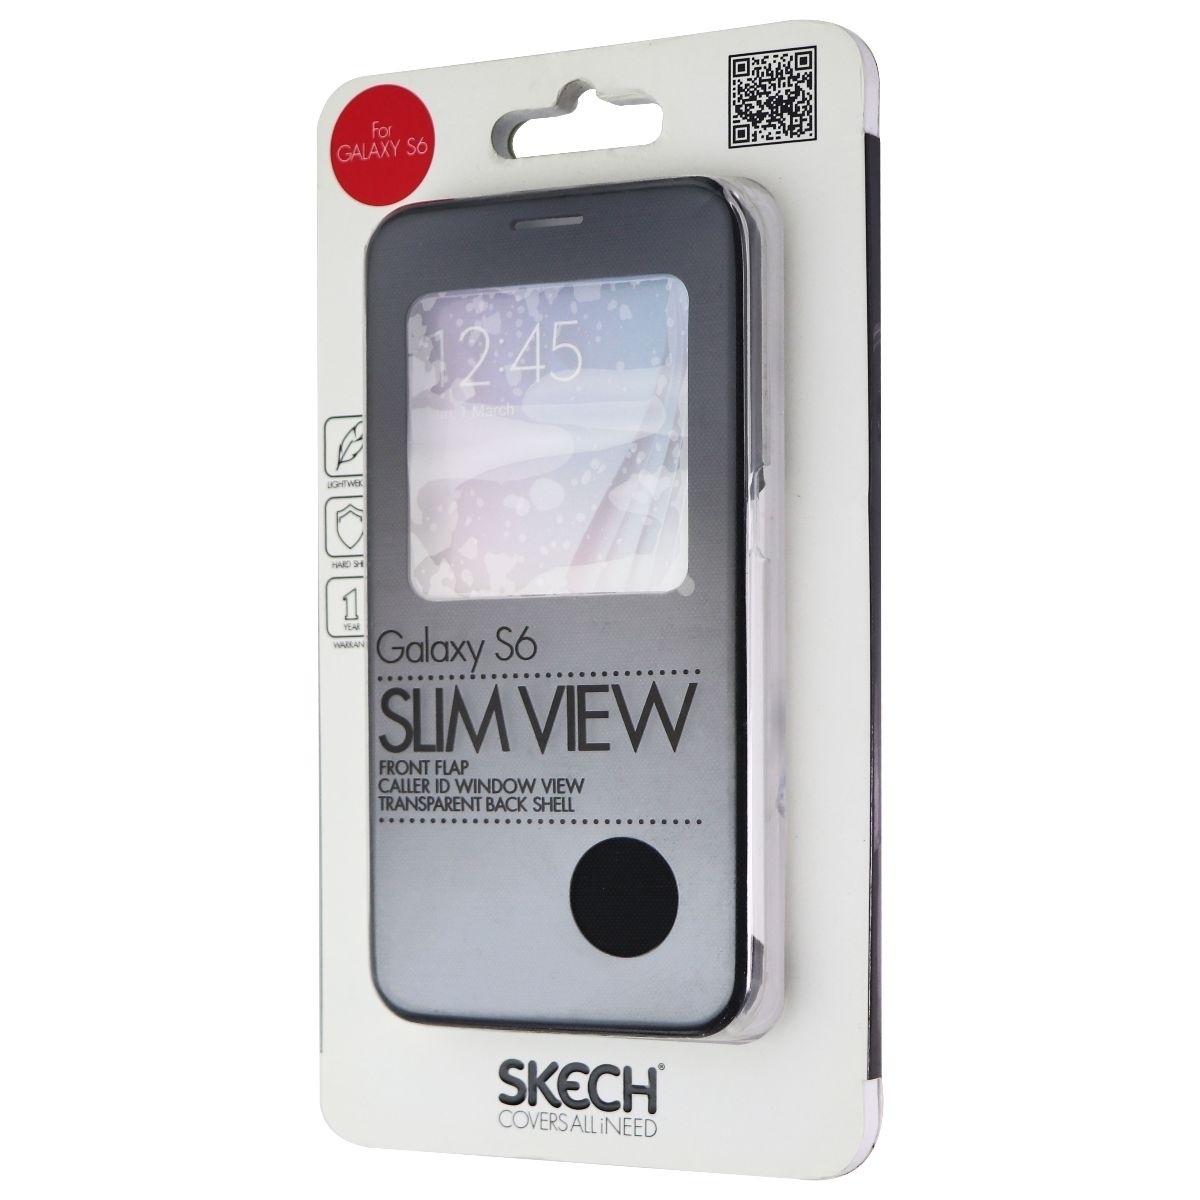 Skech (SK83-SV-CBLK) Slim View Case For Galaxy S6 - Black/Clear